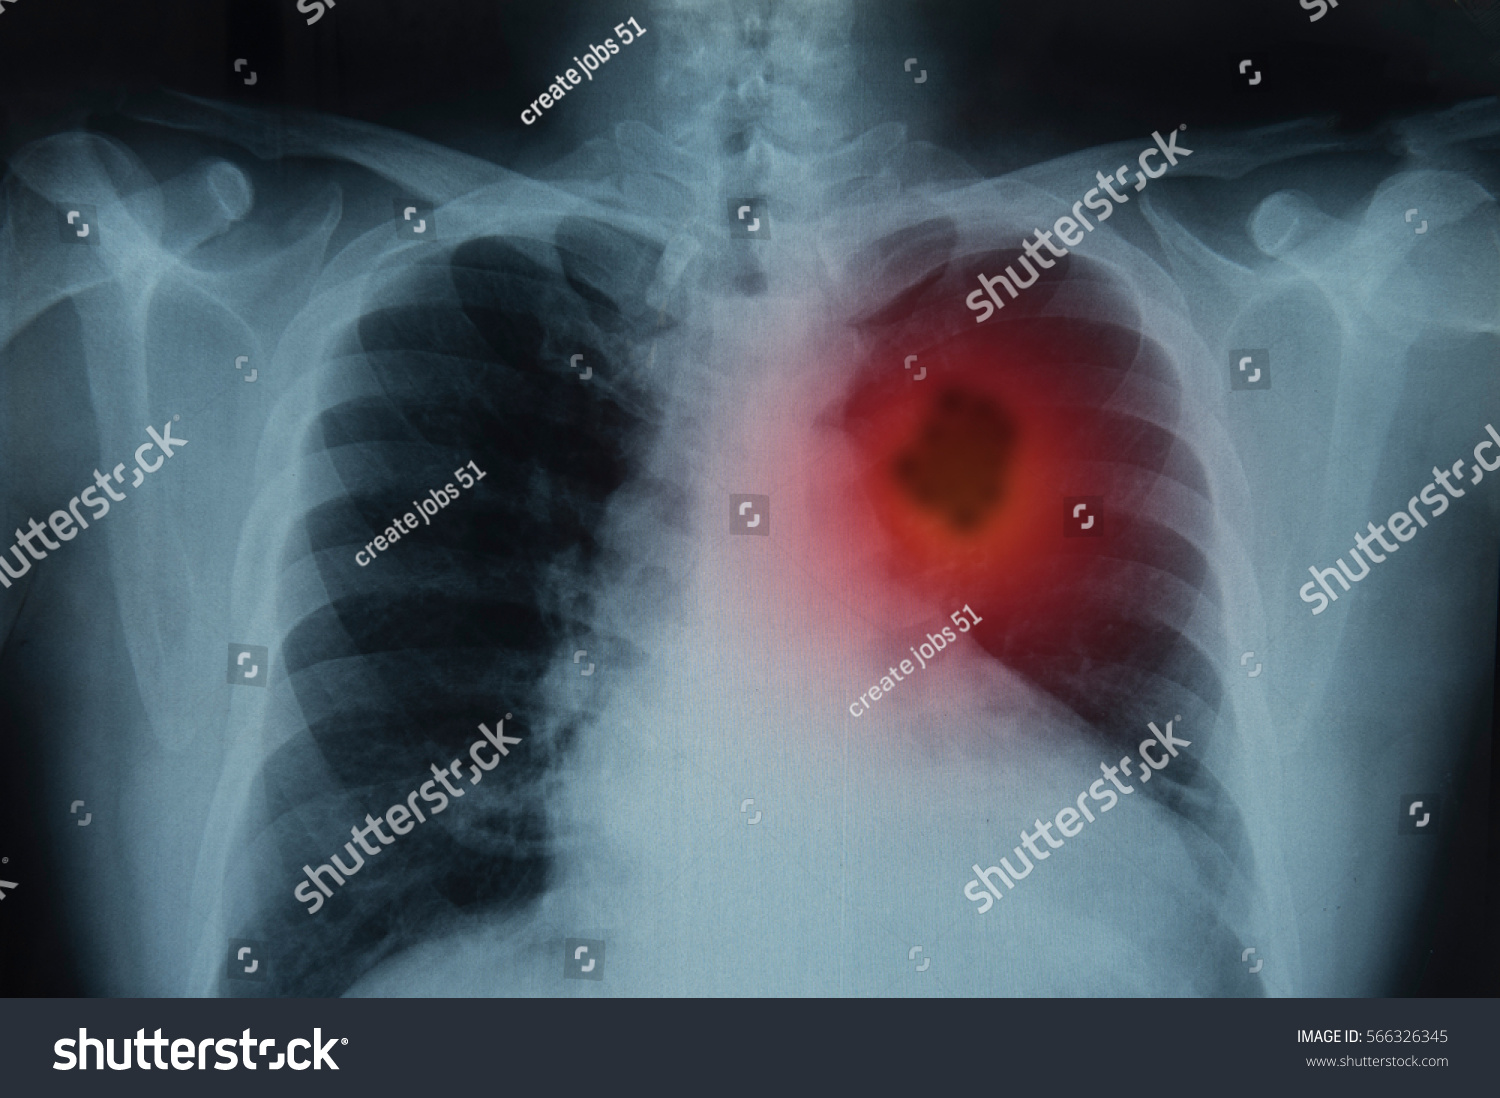 4,110 Human thorax Stock Photos, Images & Photography | Shutterstock